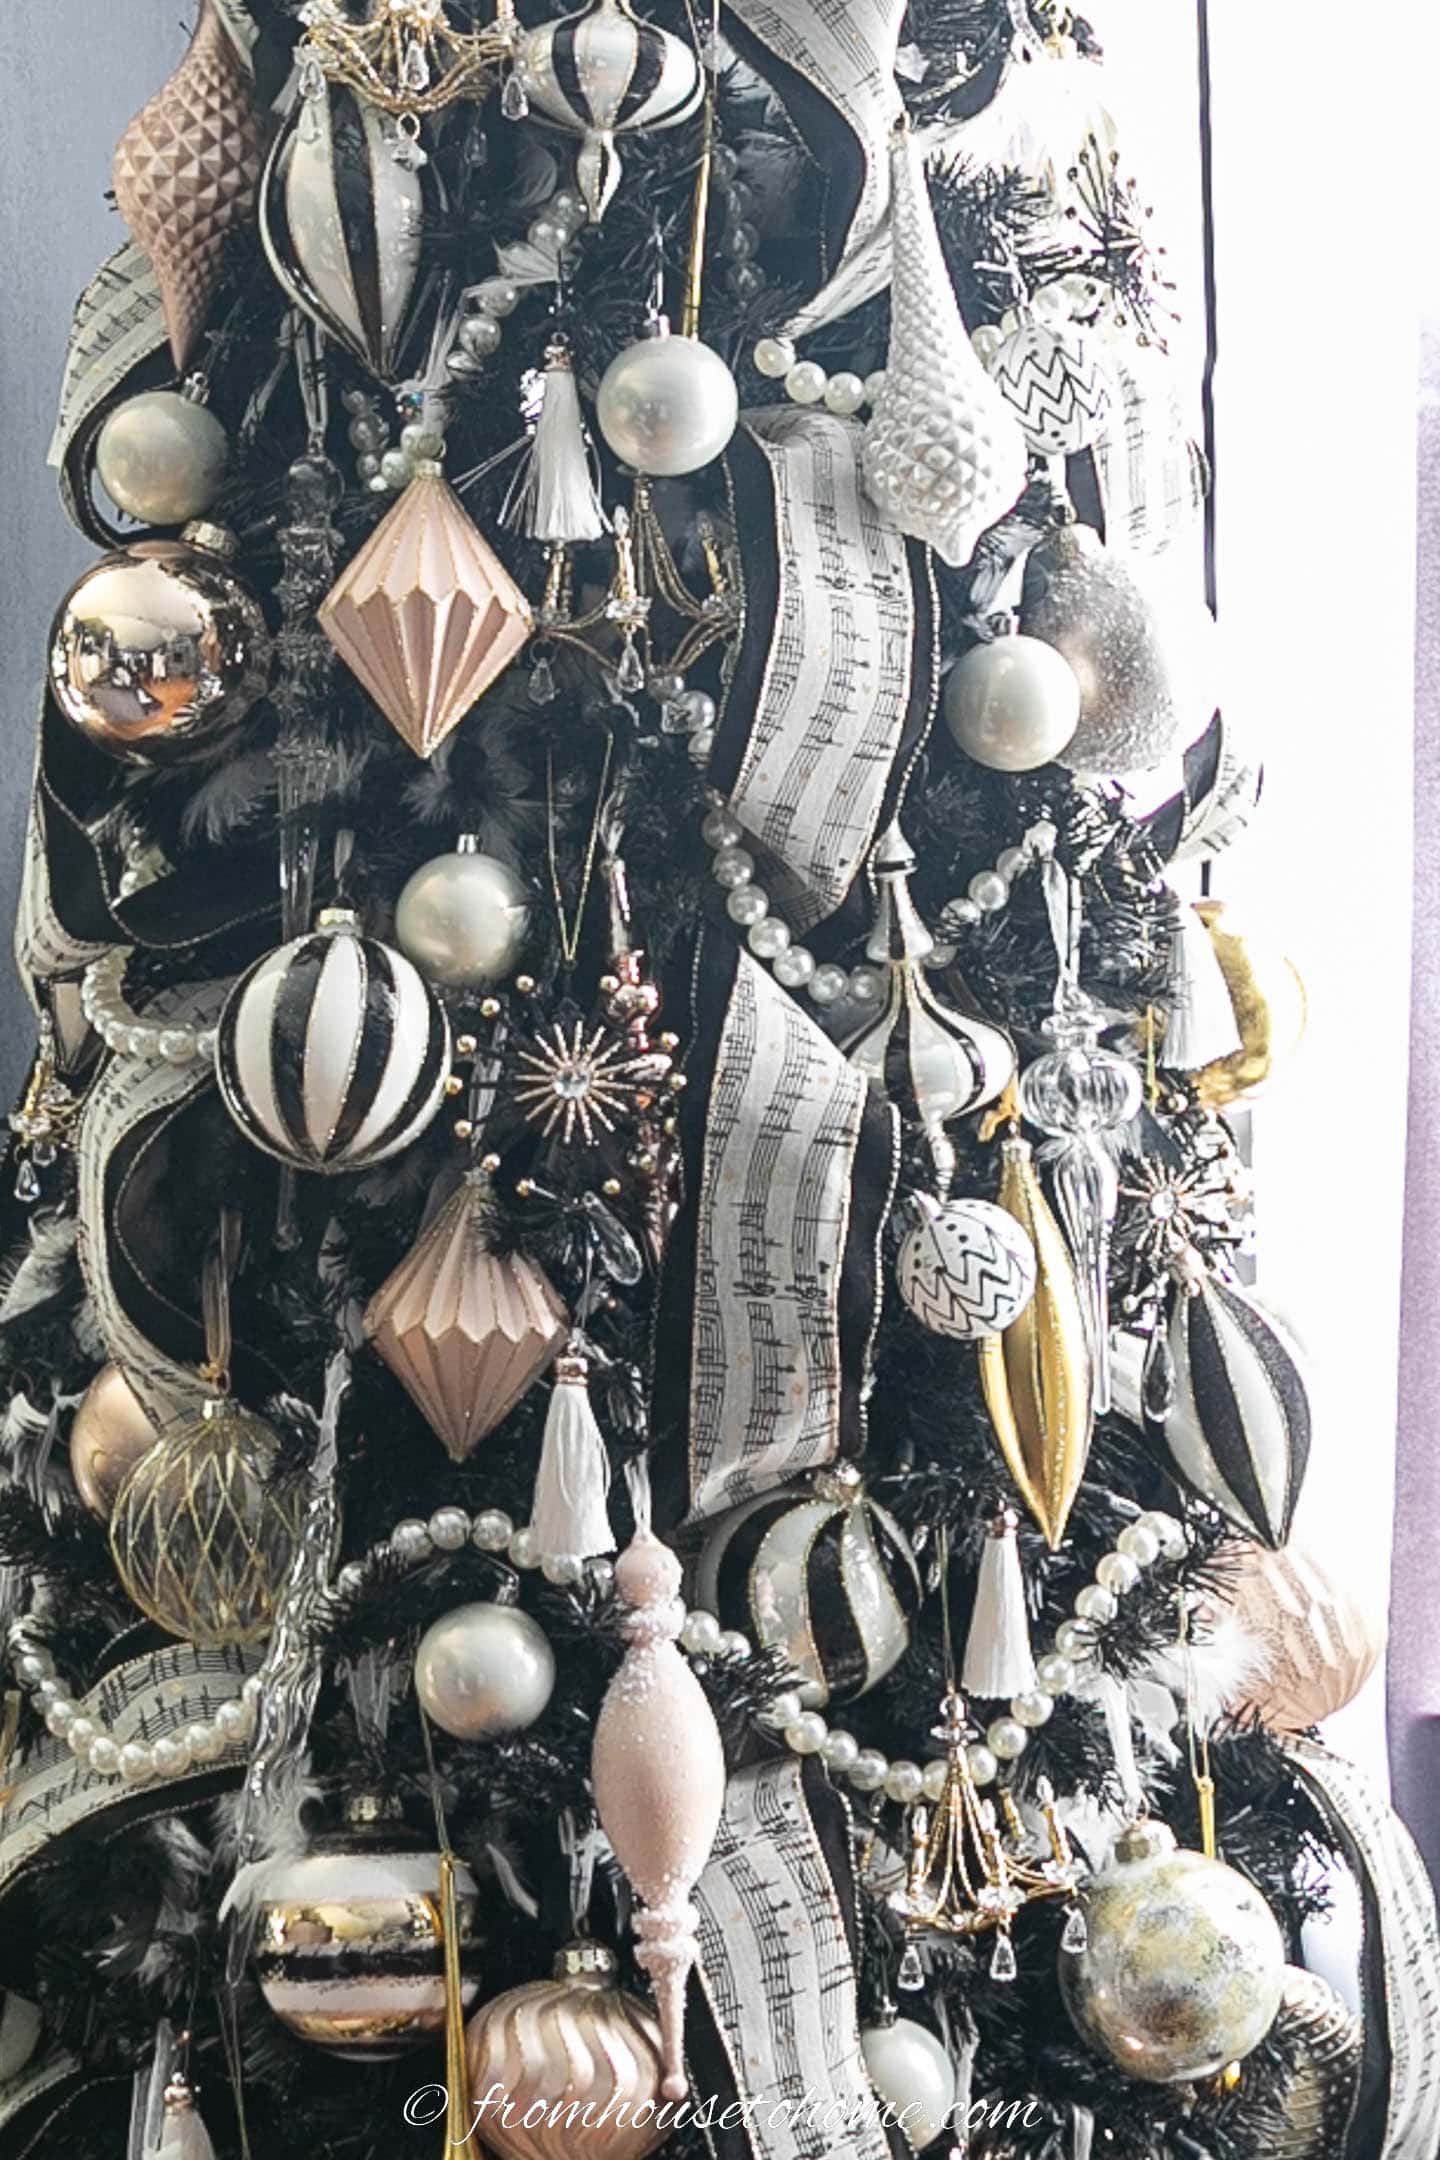 Black, white and gold ornaments on a black Christmas tree